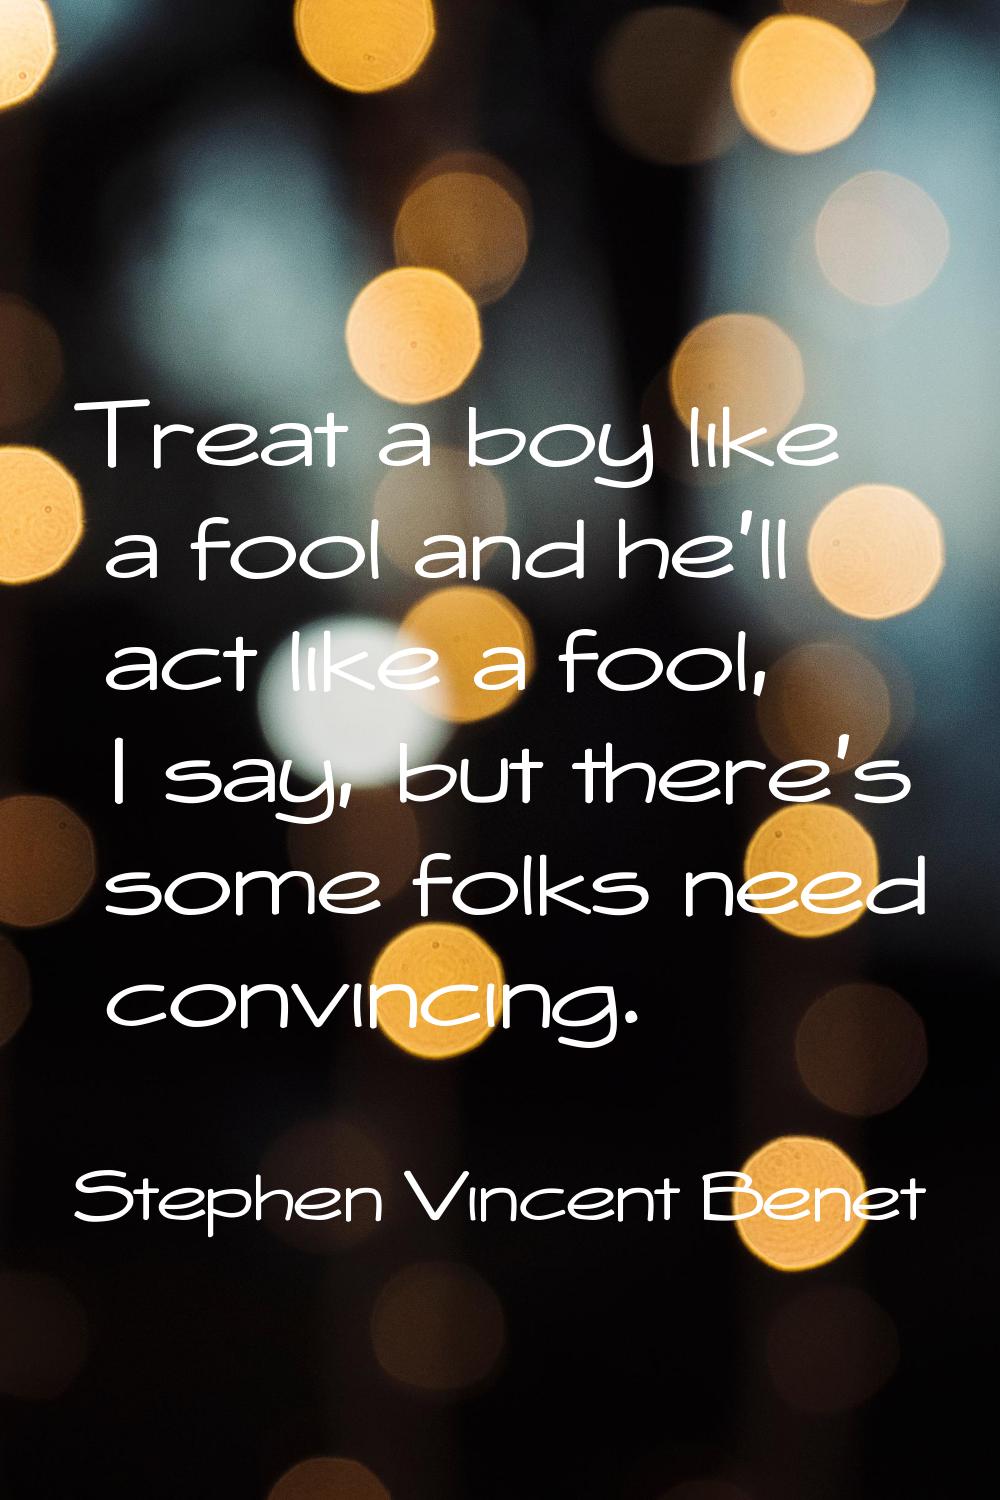 Treat a boy like a fool and he'll act like a fool, I say, but there's some folks need convincing.